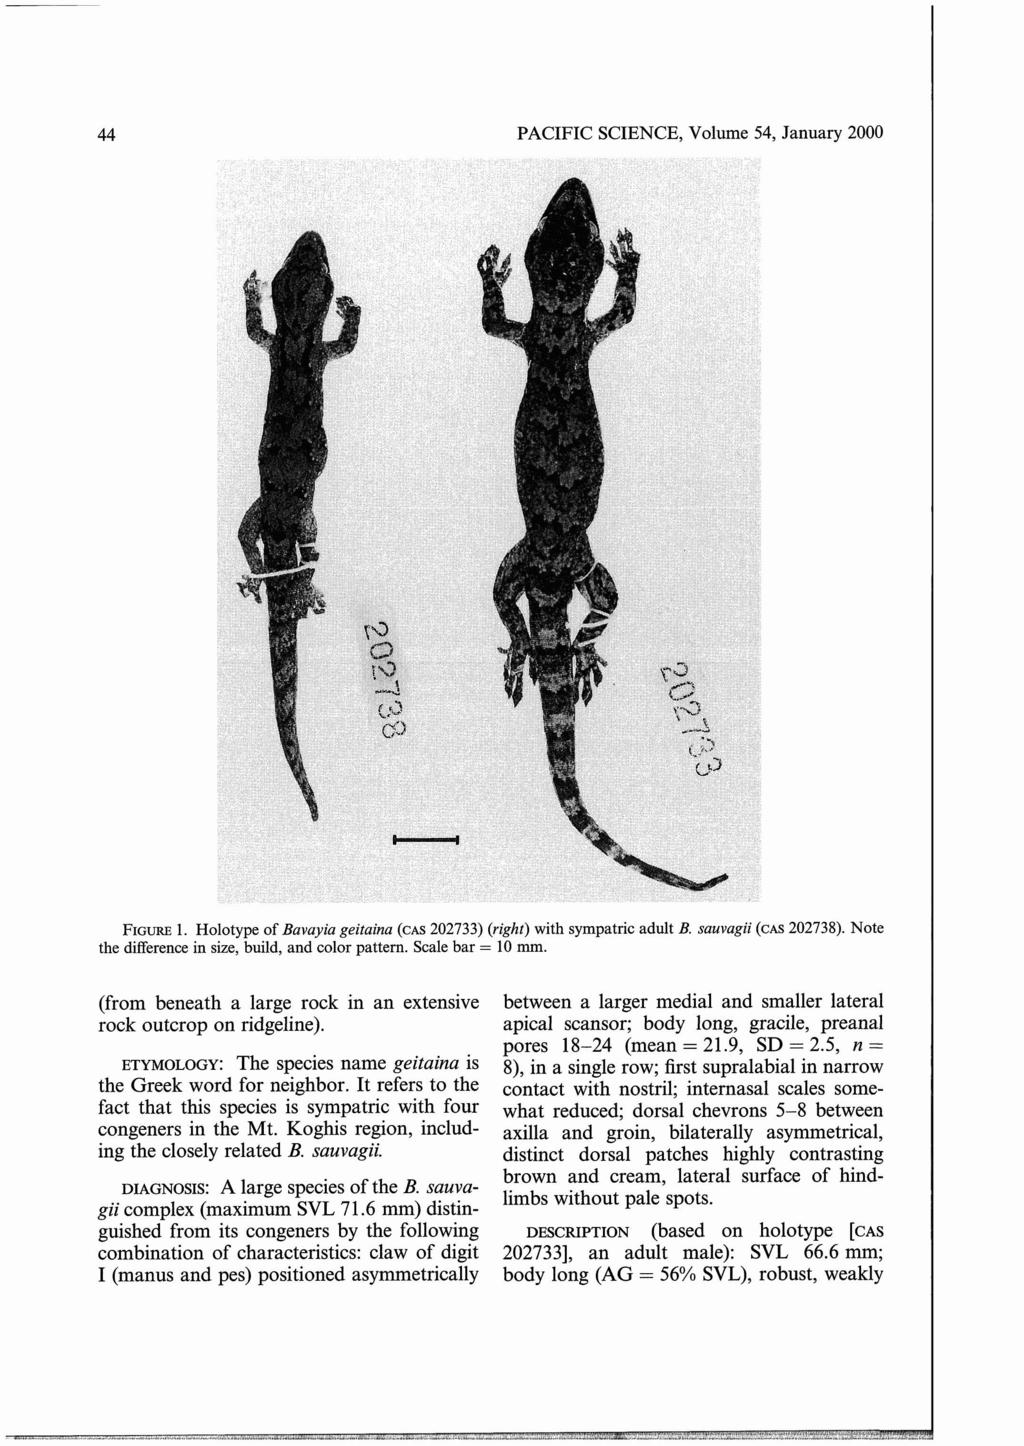 44 PACIFIC SCIENCE, Volume 54, January 2000 FIGURE 1. Holotype of Bavayia geitaina (CAS 202733) (right) with sympatric adult B. sauvagii (CAS 202738).